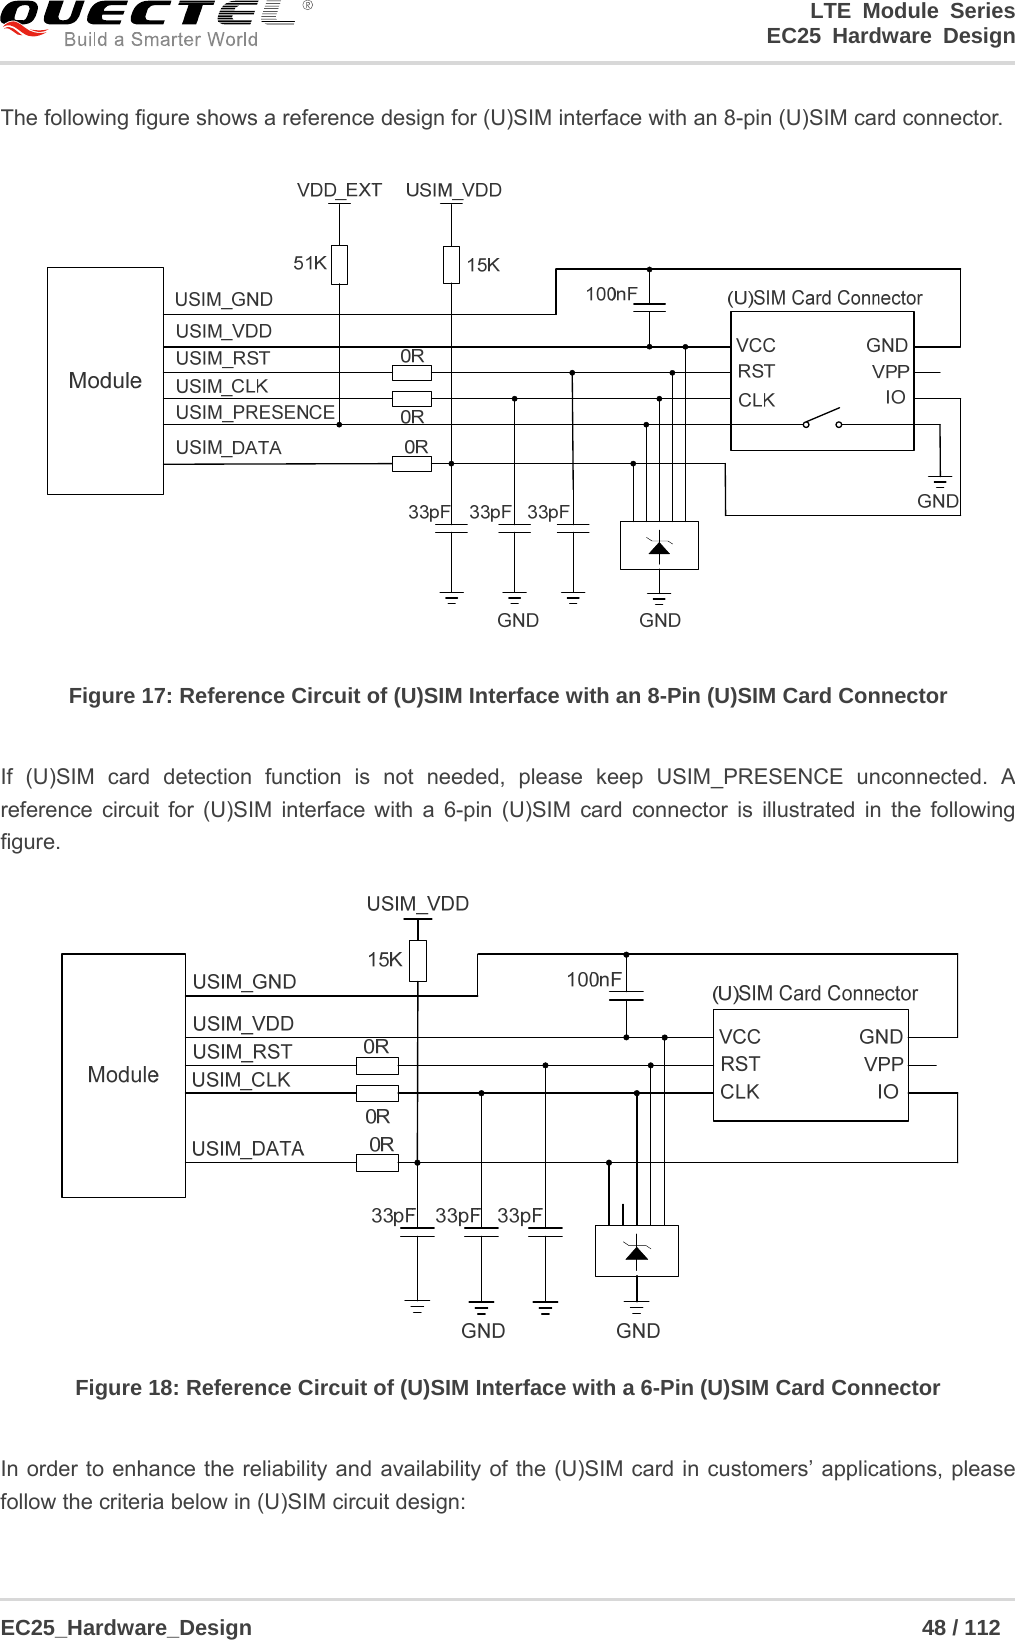 LTE Module Series                                                  EC25 Hardware Design  EC25_Hardware_Design                                                             48 / 112    The following figure shows a reference design for (U)SIM interface with an 8-pin (U)SIM card connector.  Figure 17: Reference Circuit of (U)SIM Interface with an 8-Pin (U)SIM Card Connector  If (U)SIM card detection function is not needed, please keep USIM_PRESENCE unconnected. A reference circuit for (U)SIM interface with a 6-pin (U)SIM card connector is illustrated in the following figure.  Figure 18: Reference Circuit of (U)SIM Interface with a 6-Pin (U)SIM Card Connector  In order to enhance the reliability and availability of the (U)SIM card in customers’ applications, please follow the criteria below in (U)SIM circuit design:  